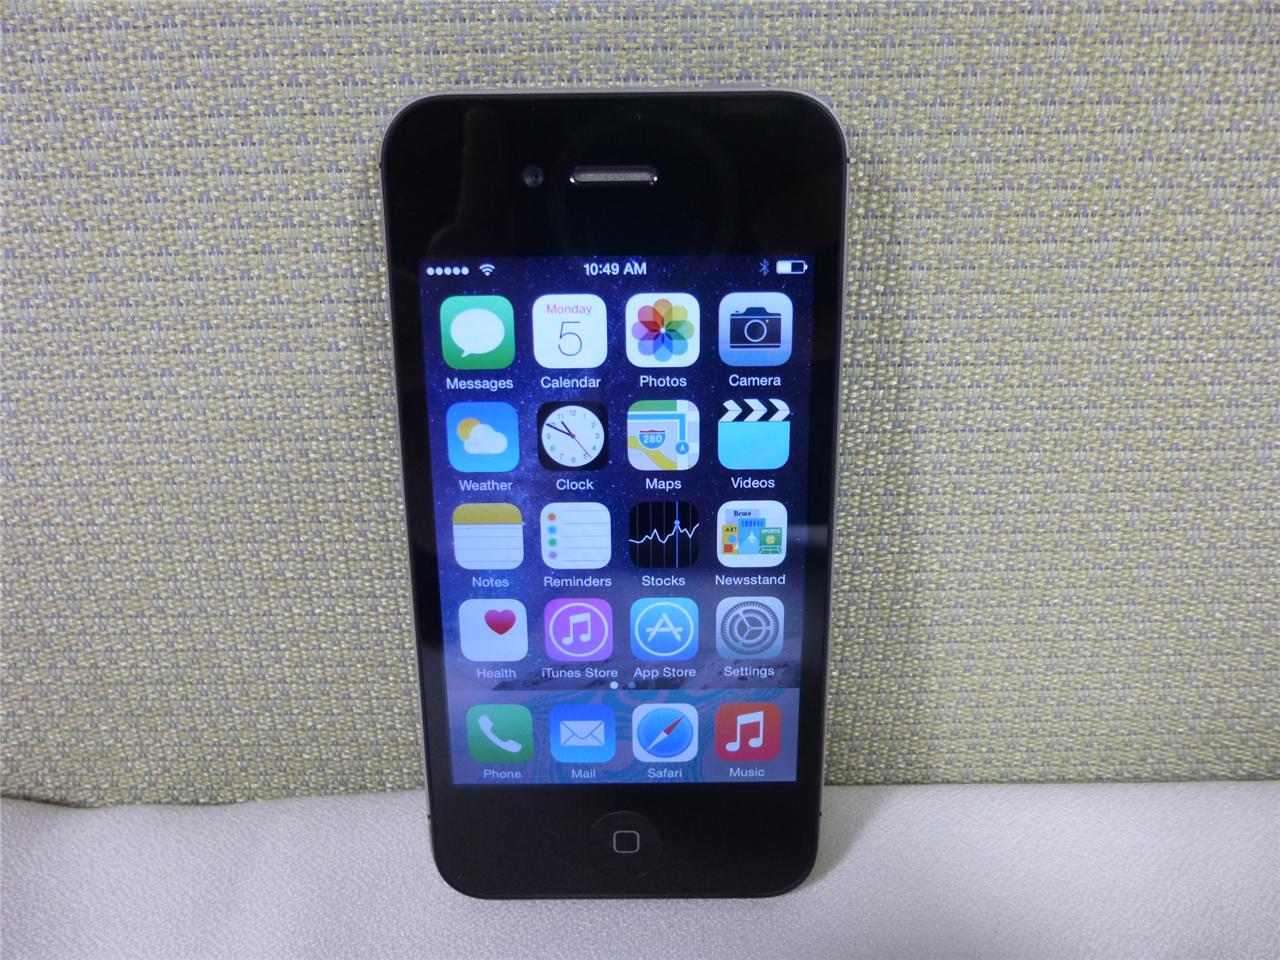 Details about **USED** Verizon Apple iPhone 4S 16GB - Black - CLEAN ...